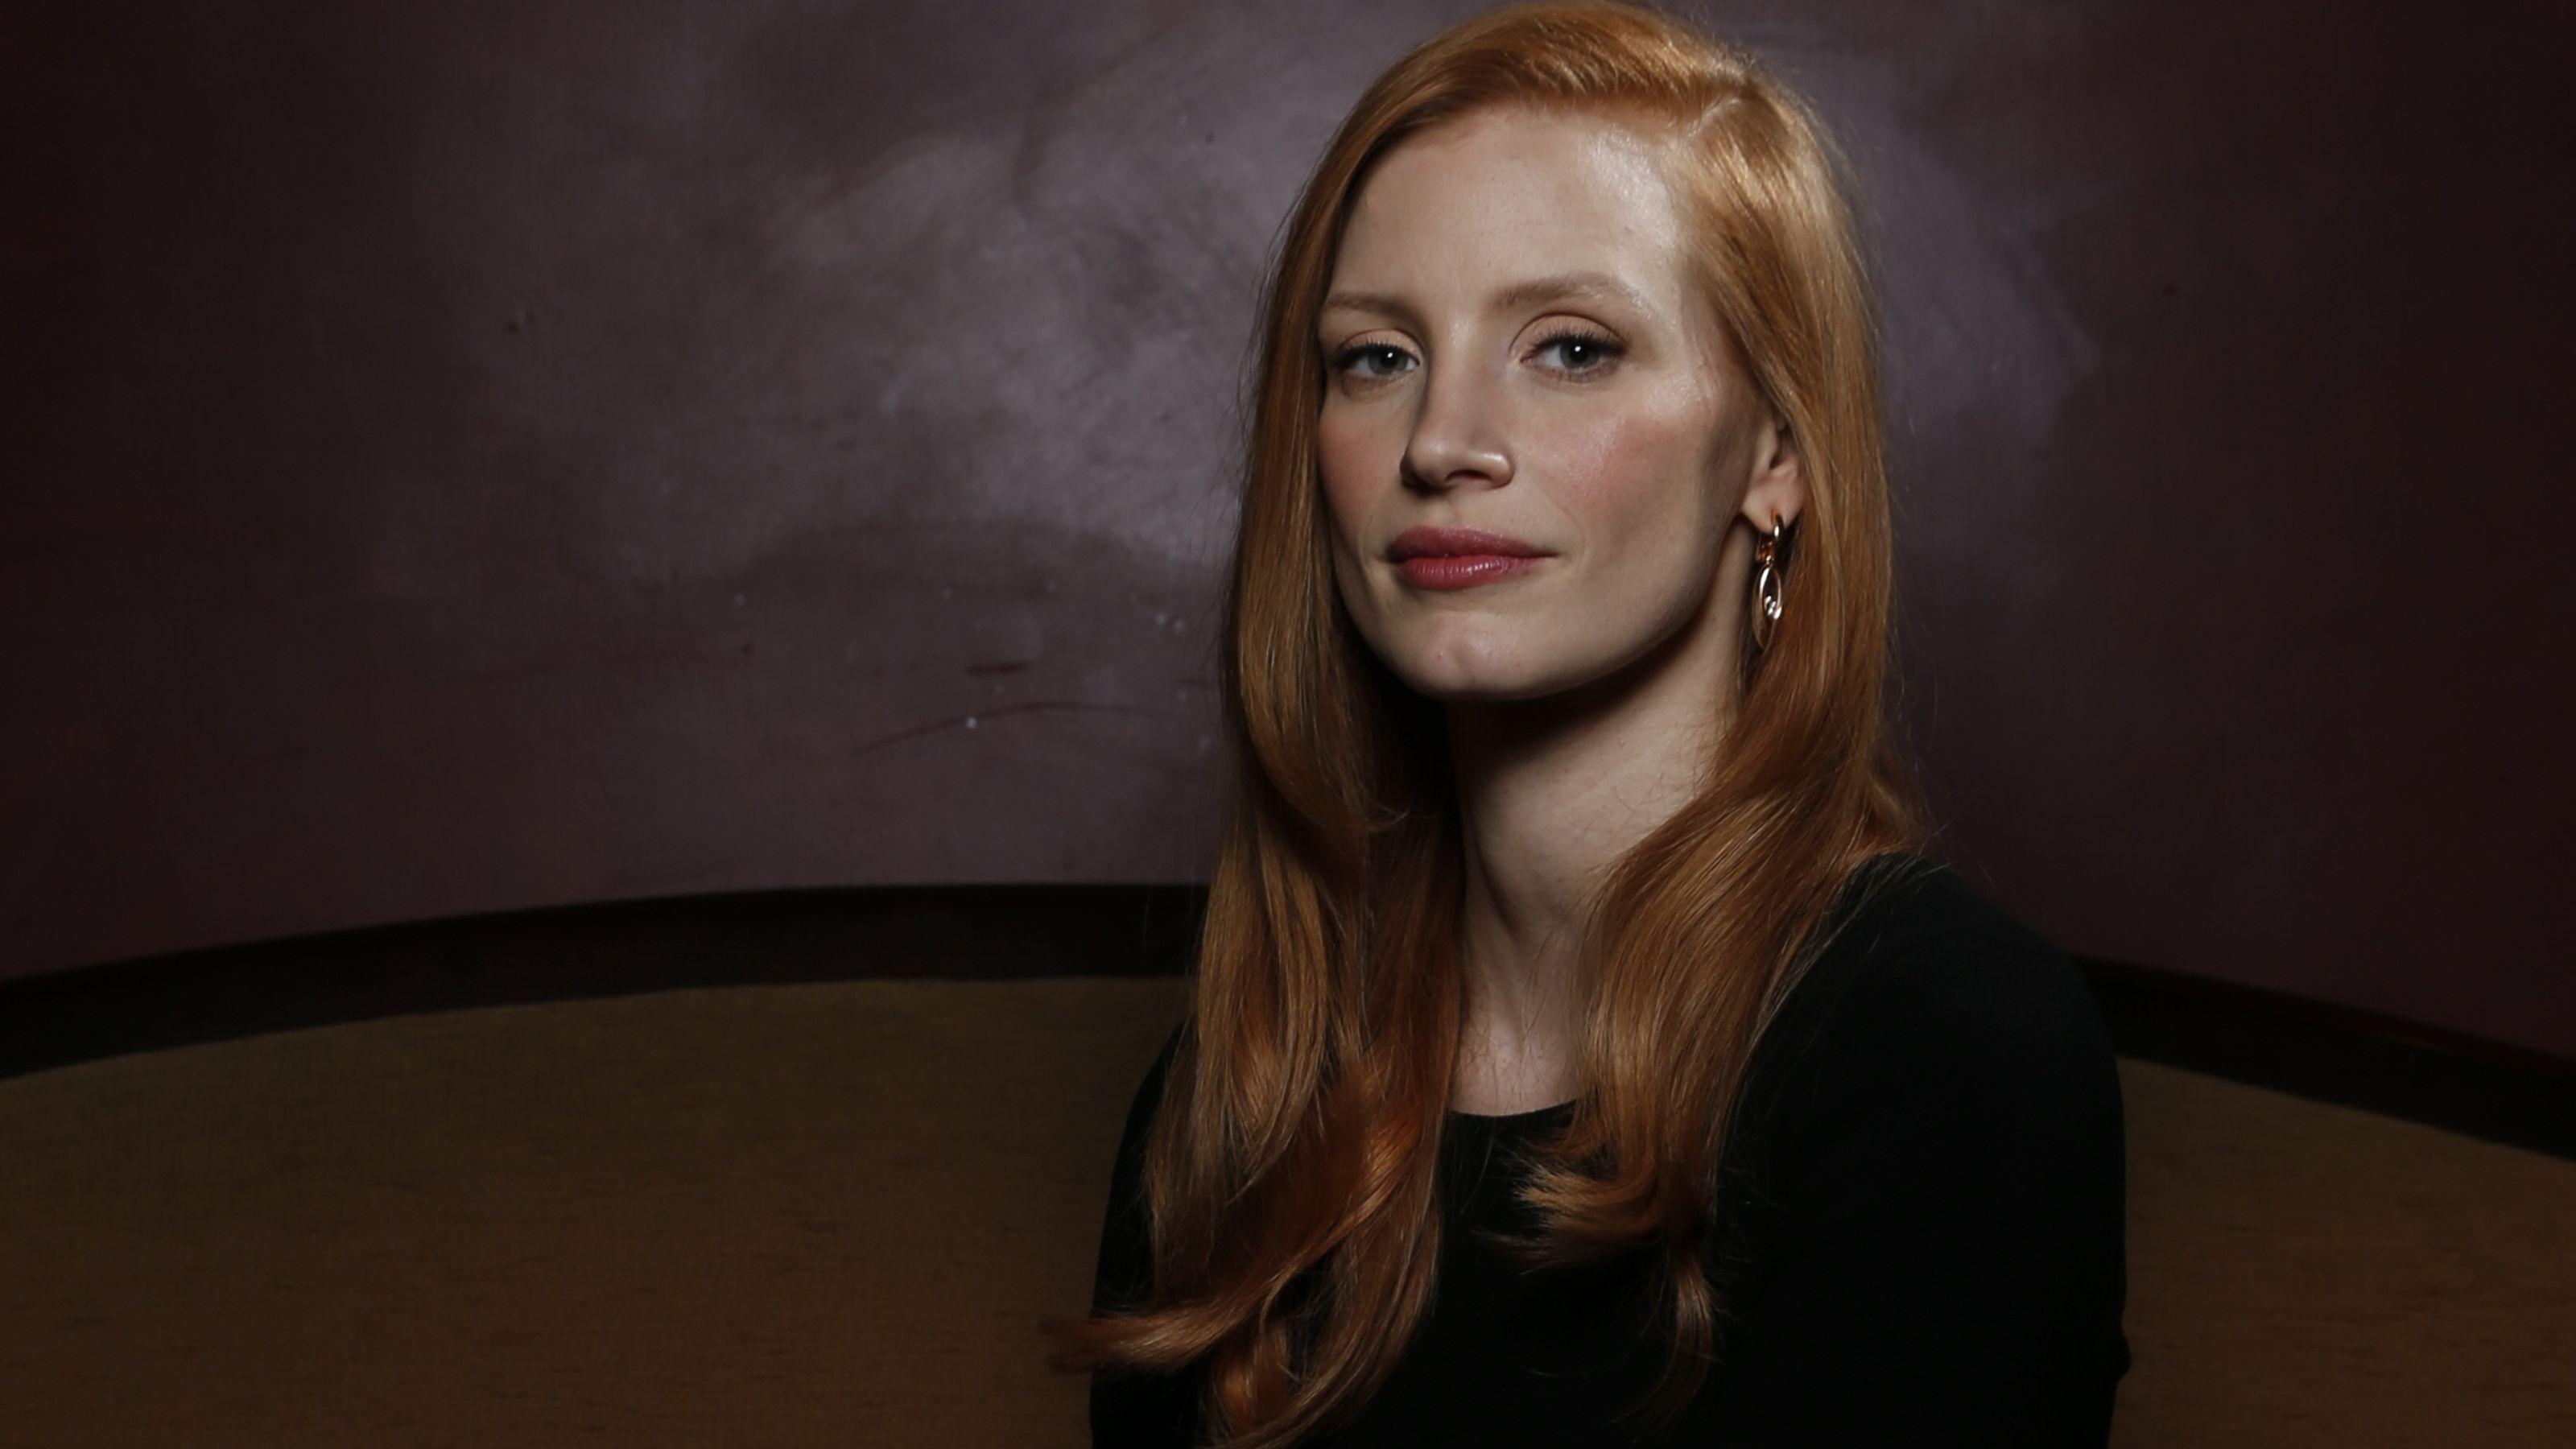 Jessica Chastain Wallpaper Image 7193 3200x1800